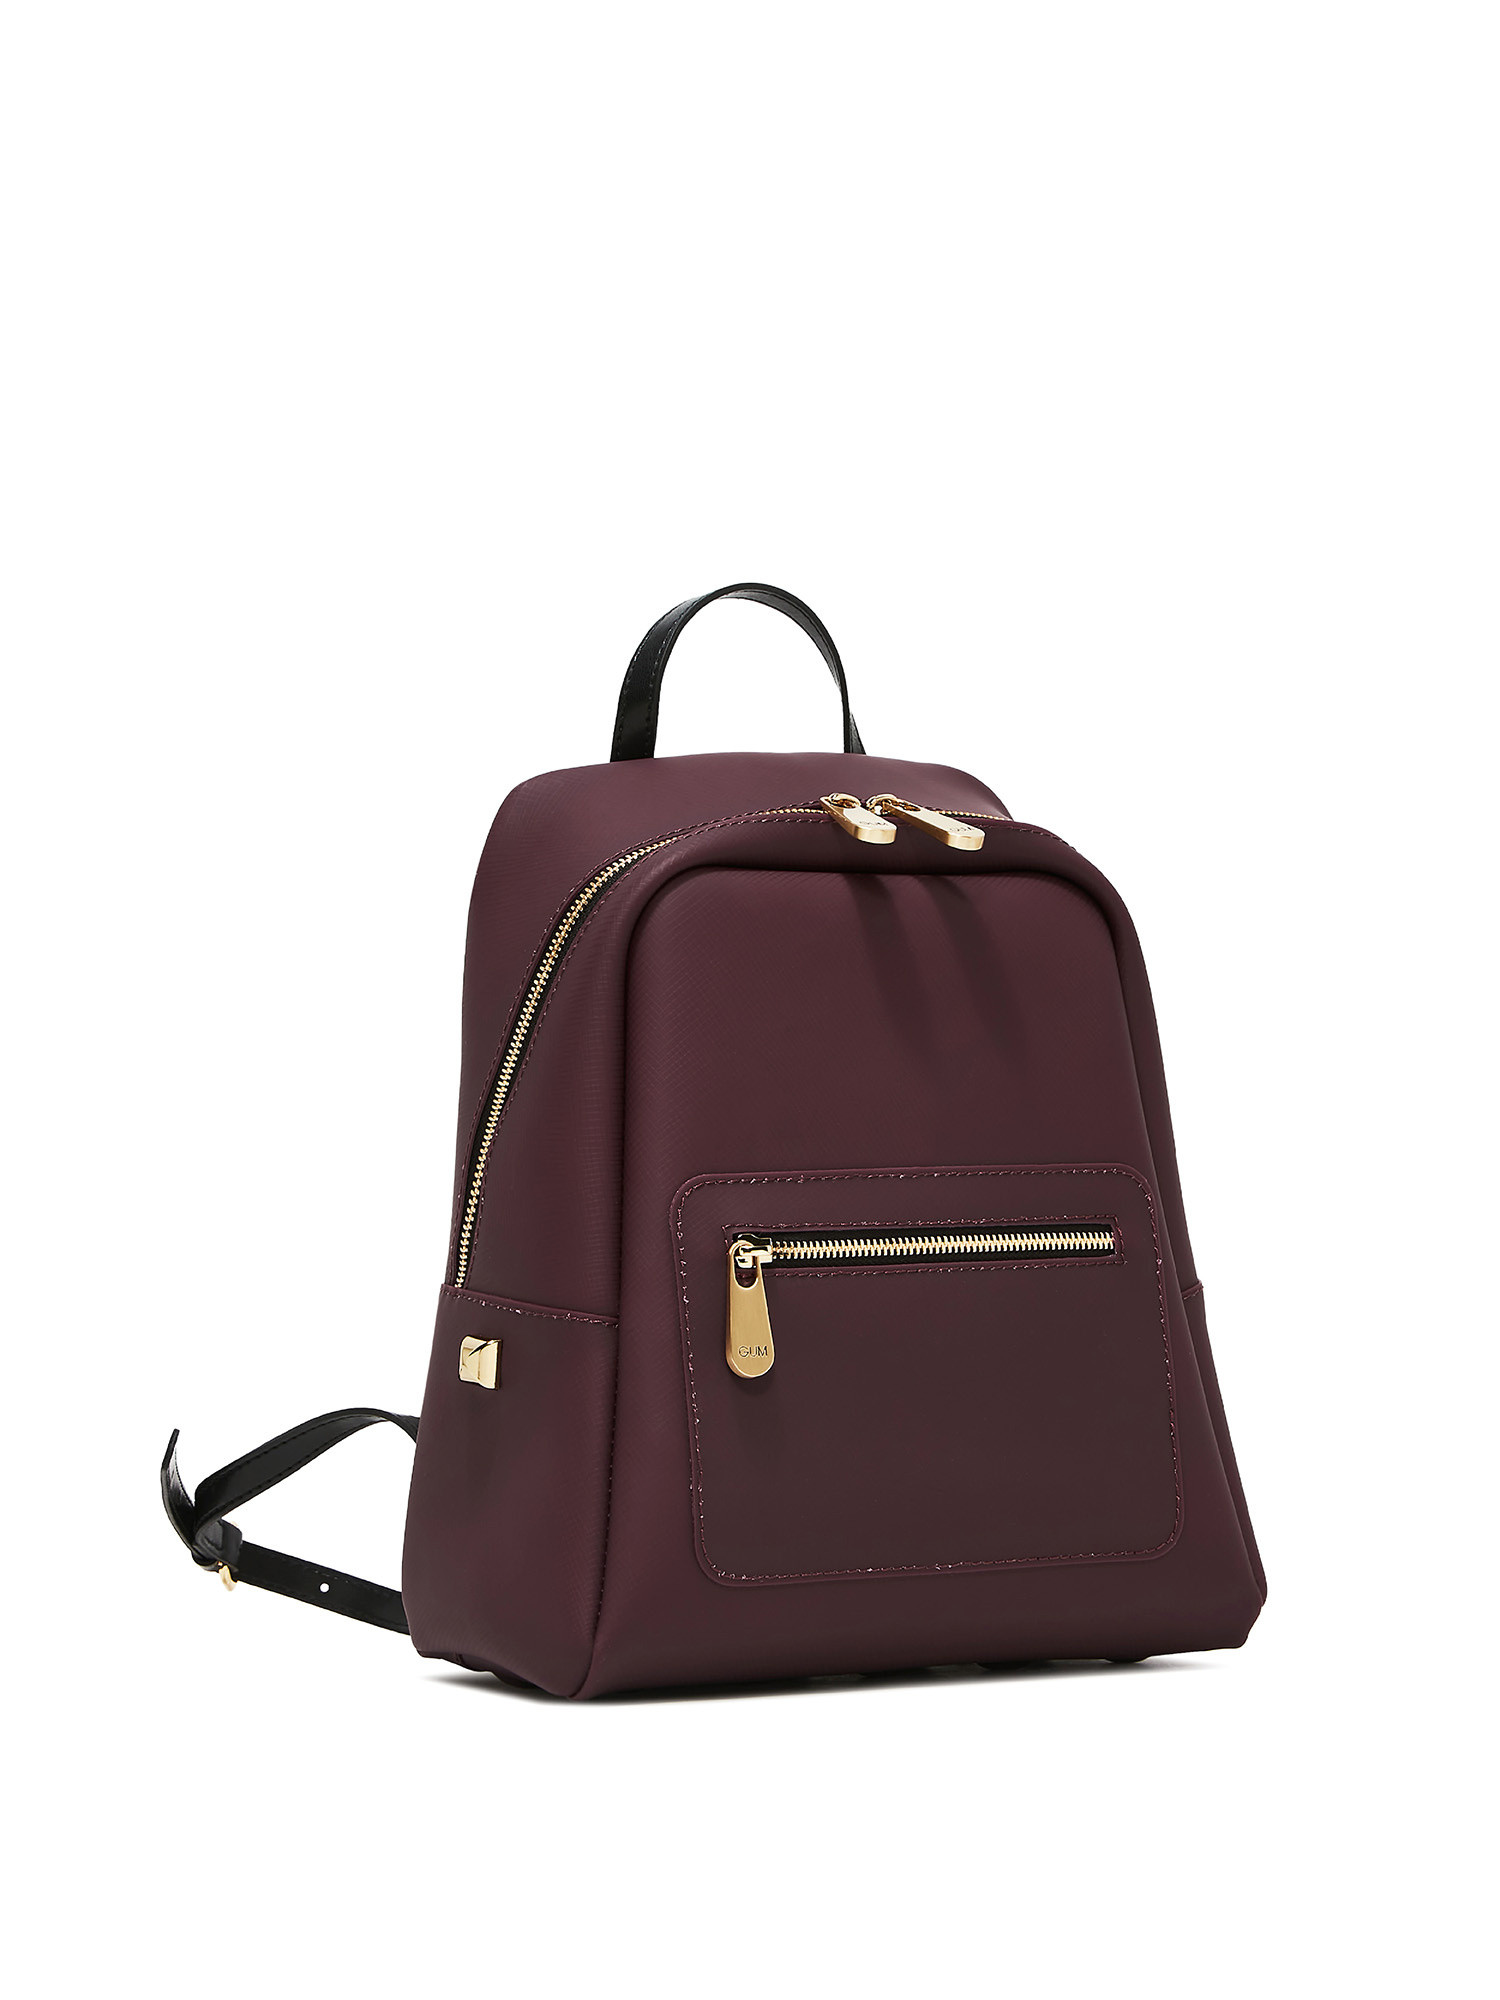 Medium Maxi Studs backpack, Red Bordeaux, large image number 2